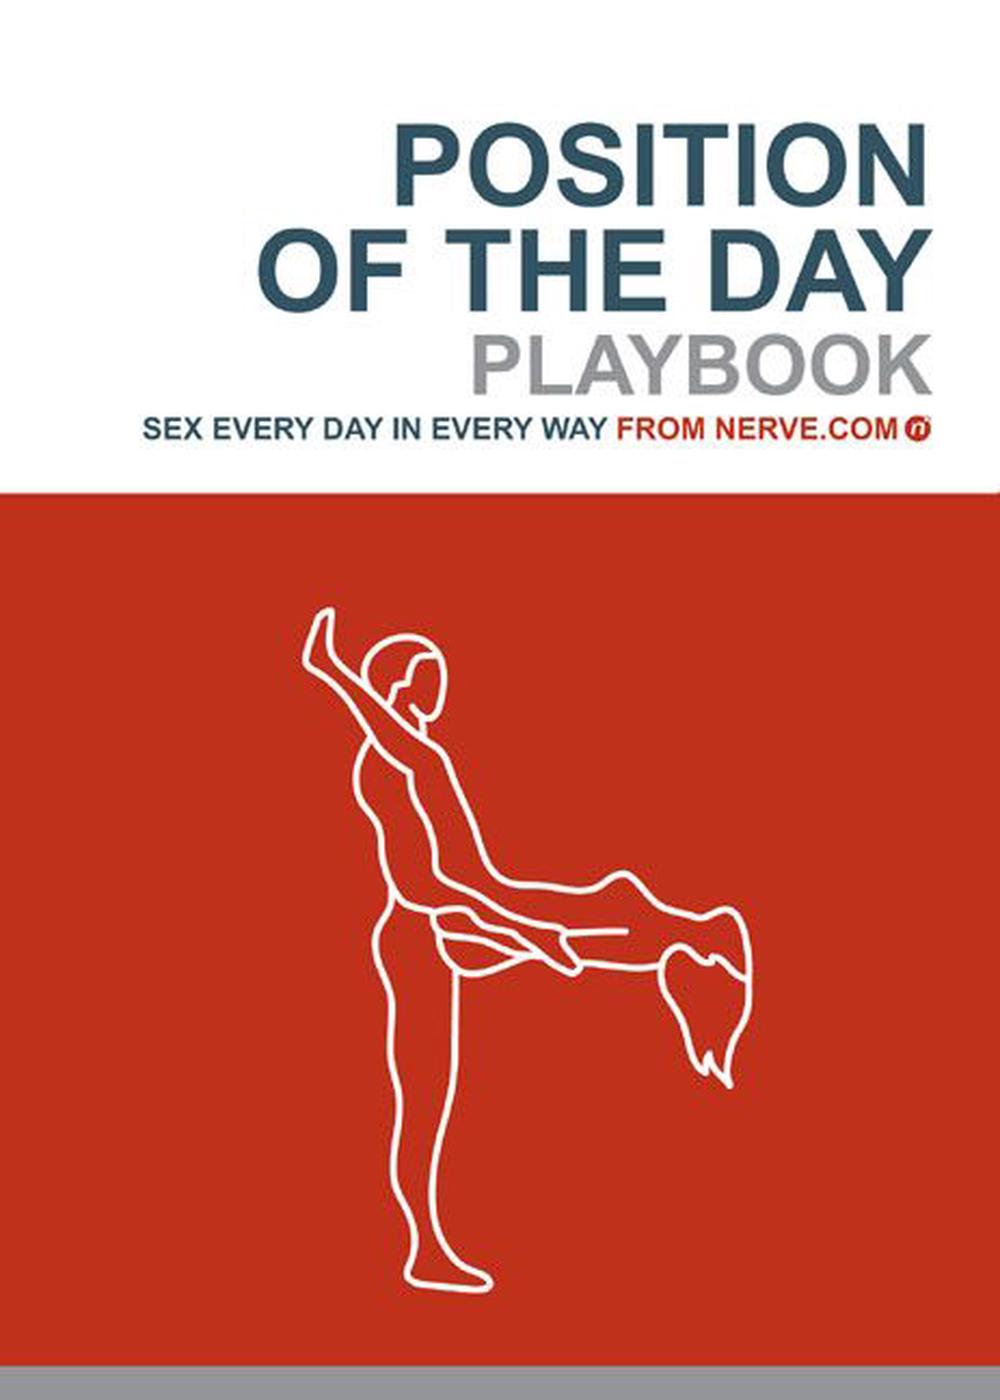 Position Of The Day Playbook Sex Every Day In Every Way By Nerve Com